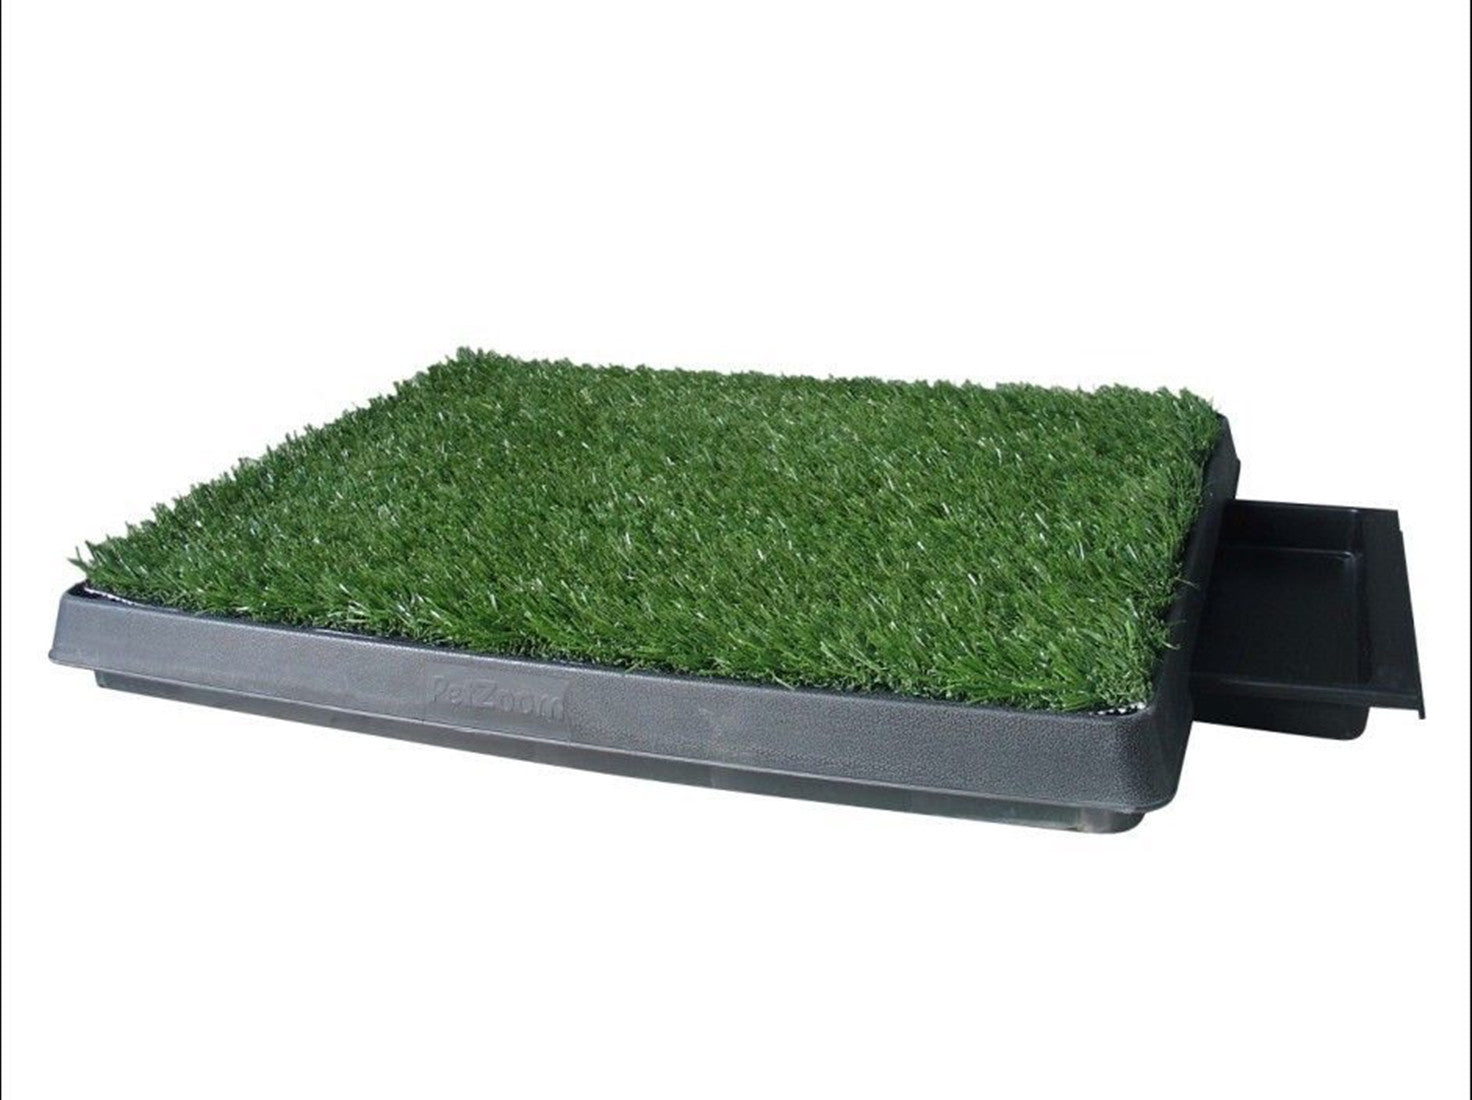 Indoor Dog Toilet Grass Potty Training Mat Loo Pad Pad With 2 grass